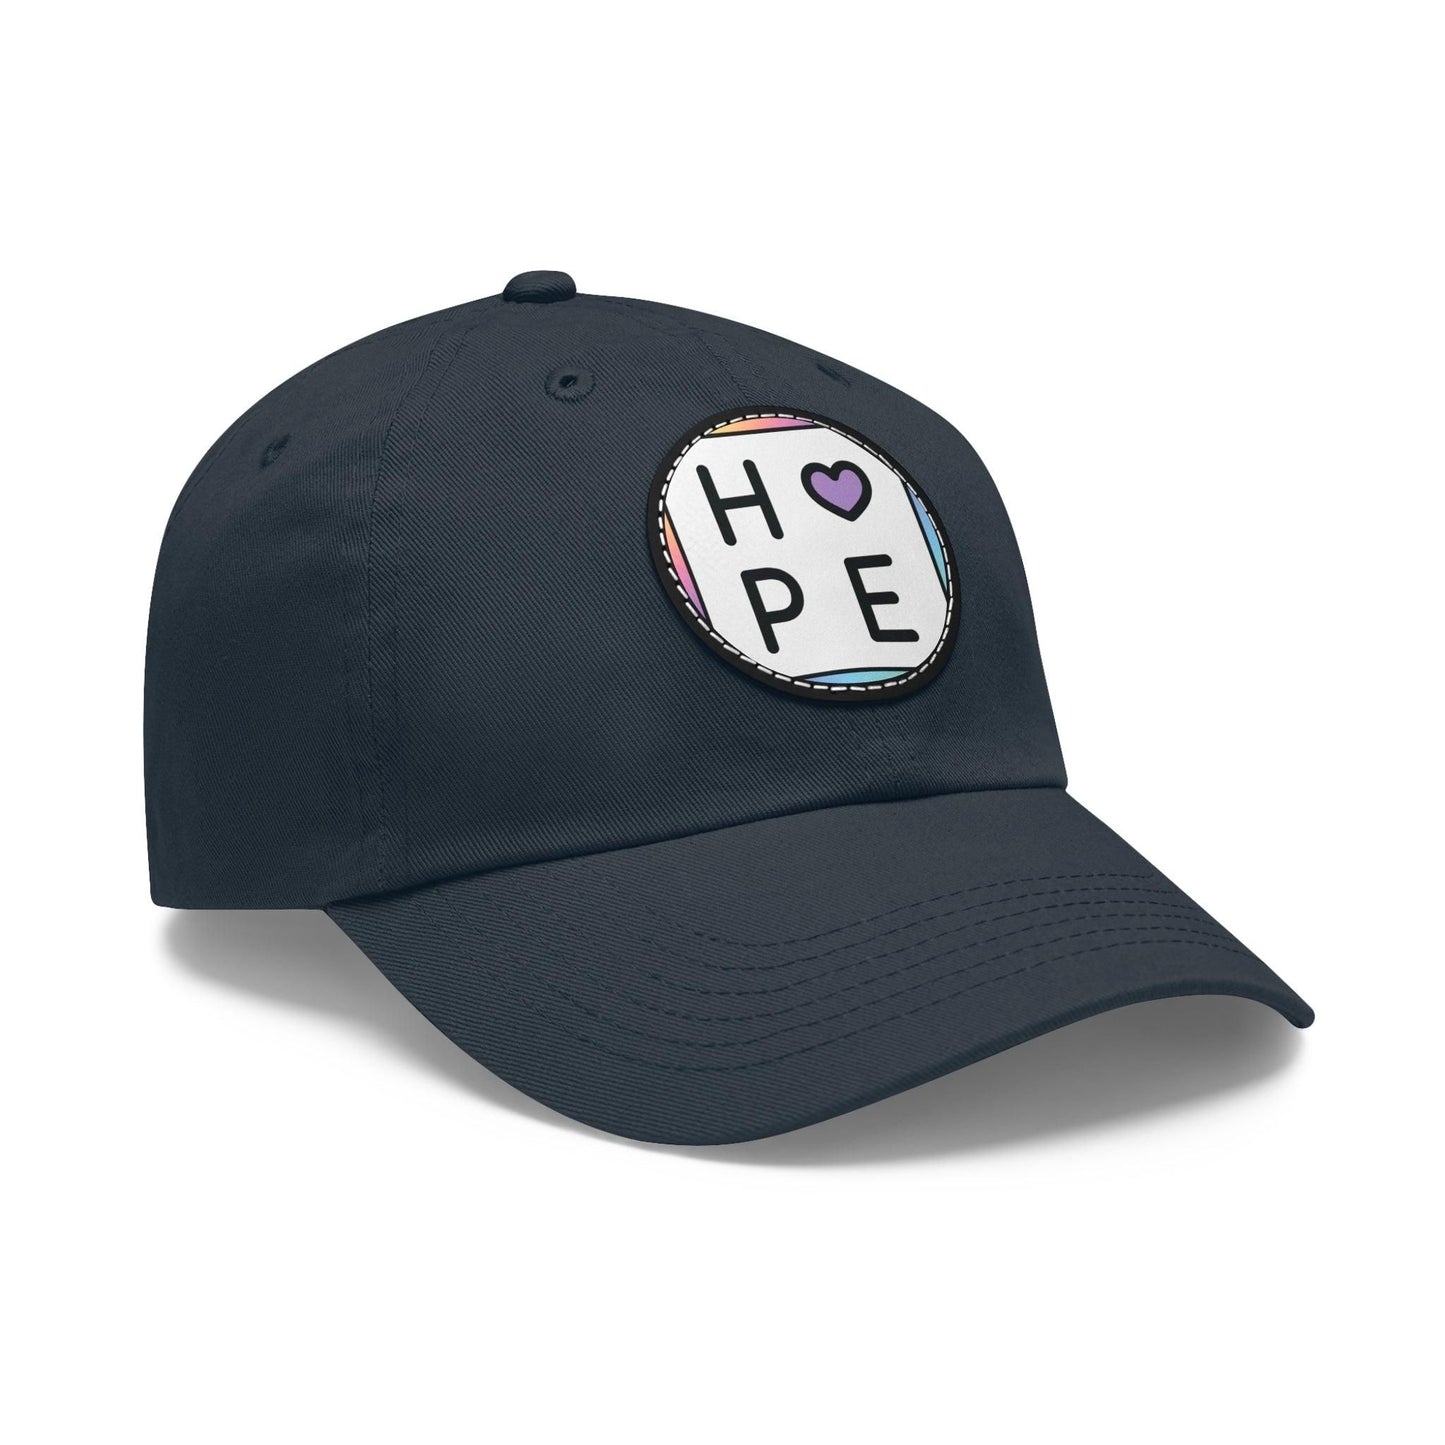 Hope Baseball Cap with Leather Patch Cap Navy / Black patch Circle One size